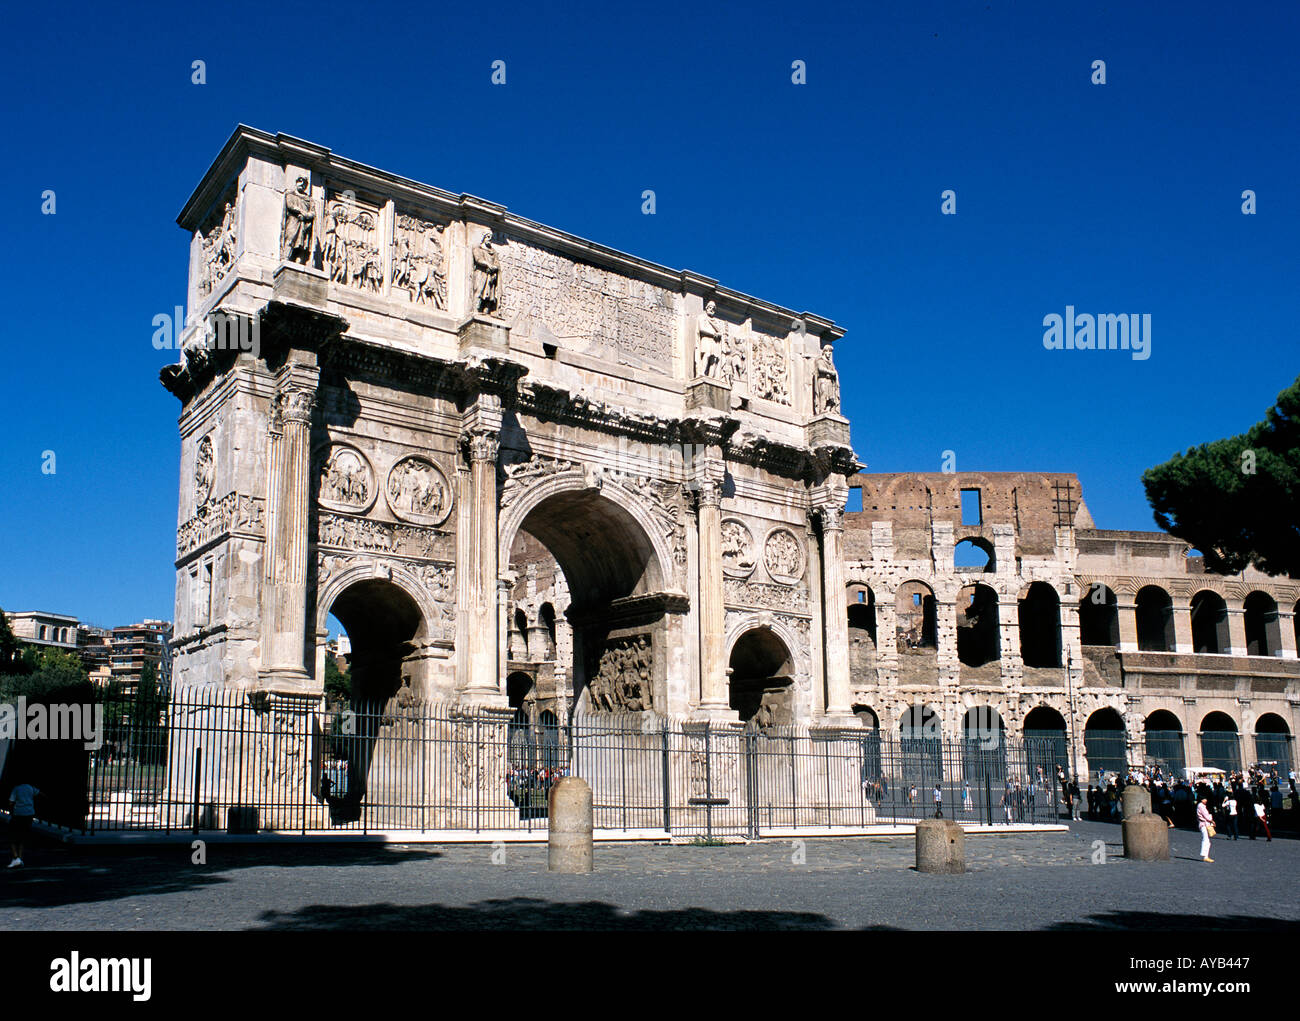 Arch of Constantine at Colisium in Rome Italy Stock Photo